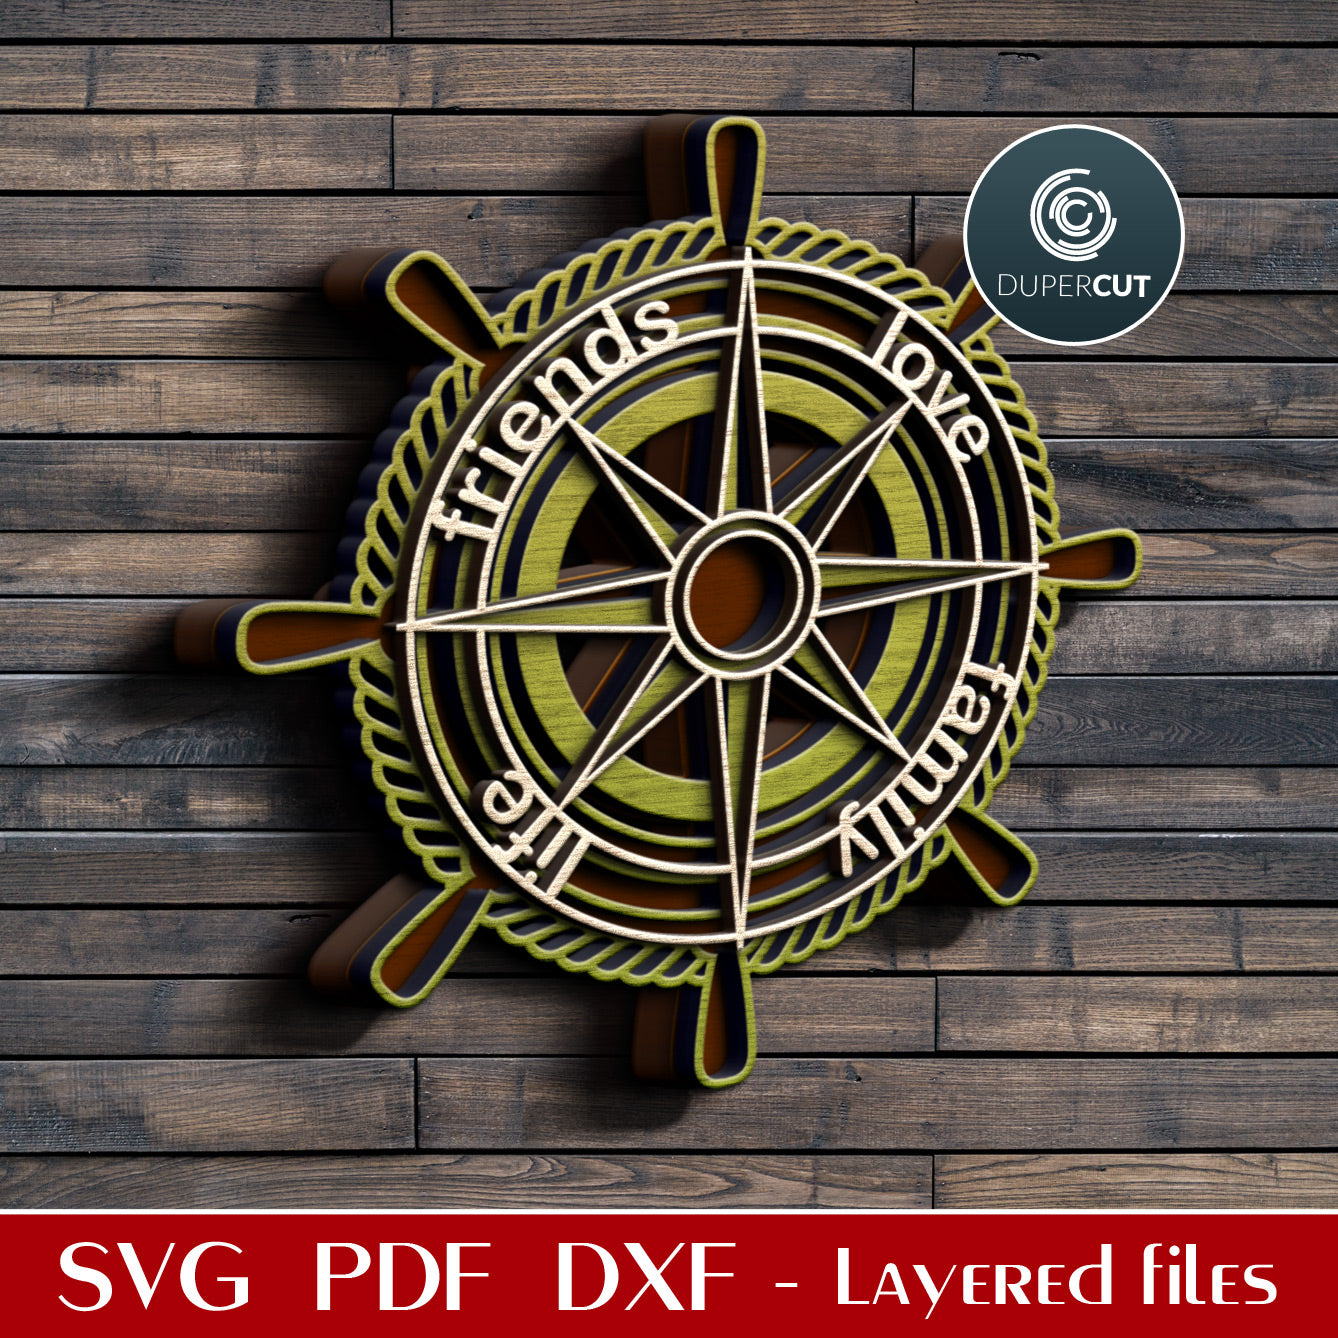 Marine compass sign - diy cabin decor - love family life friends - SVG PDF DXF layered laser cutting files for Glowforge, Cricut, Silhouette, CNC plasma machines by DuperCut